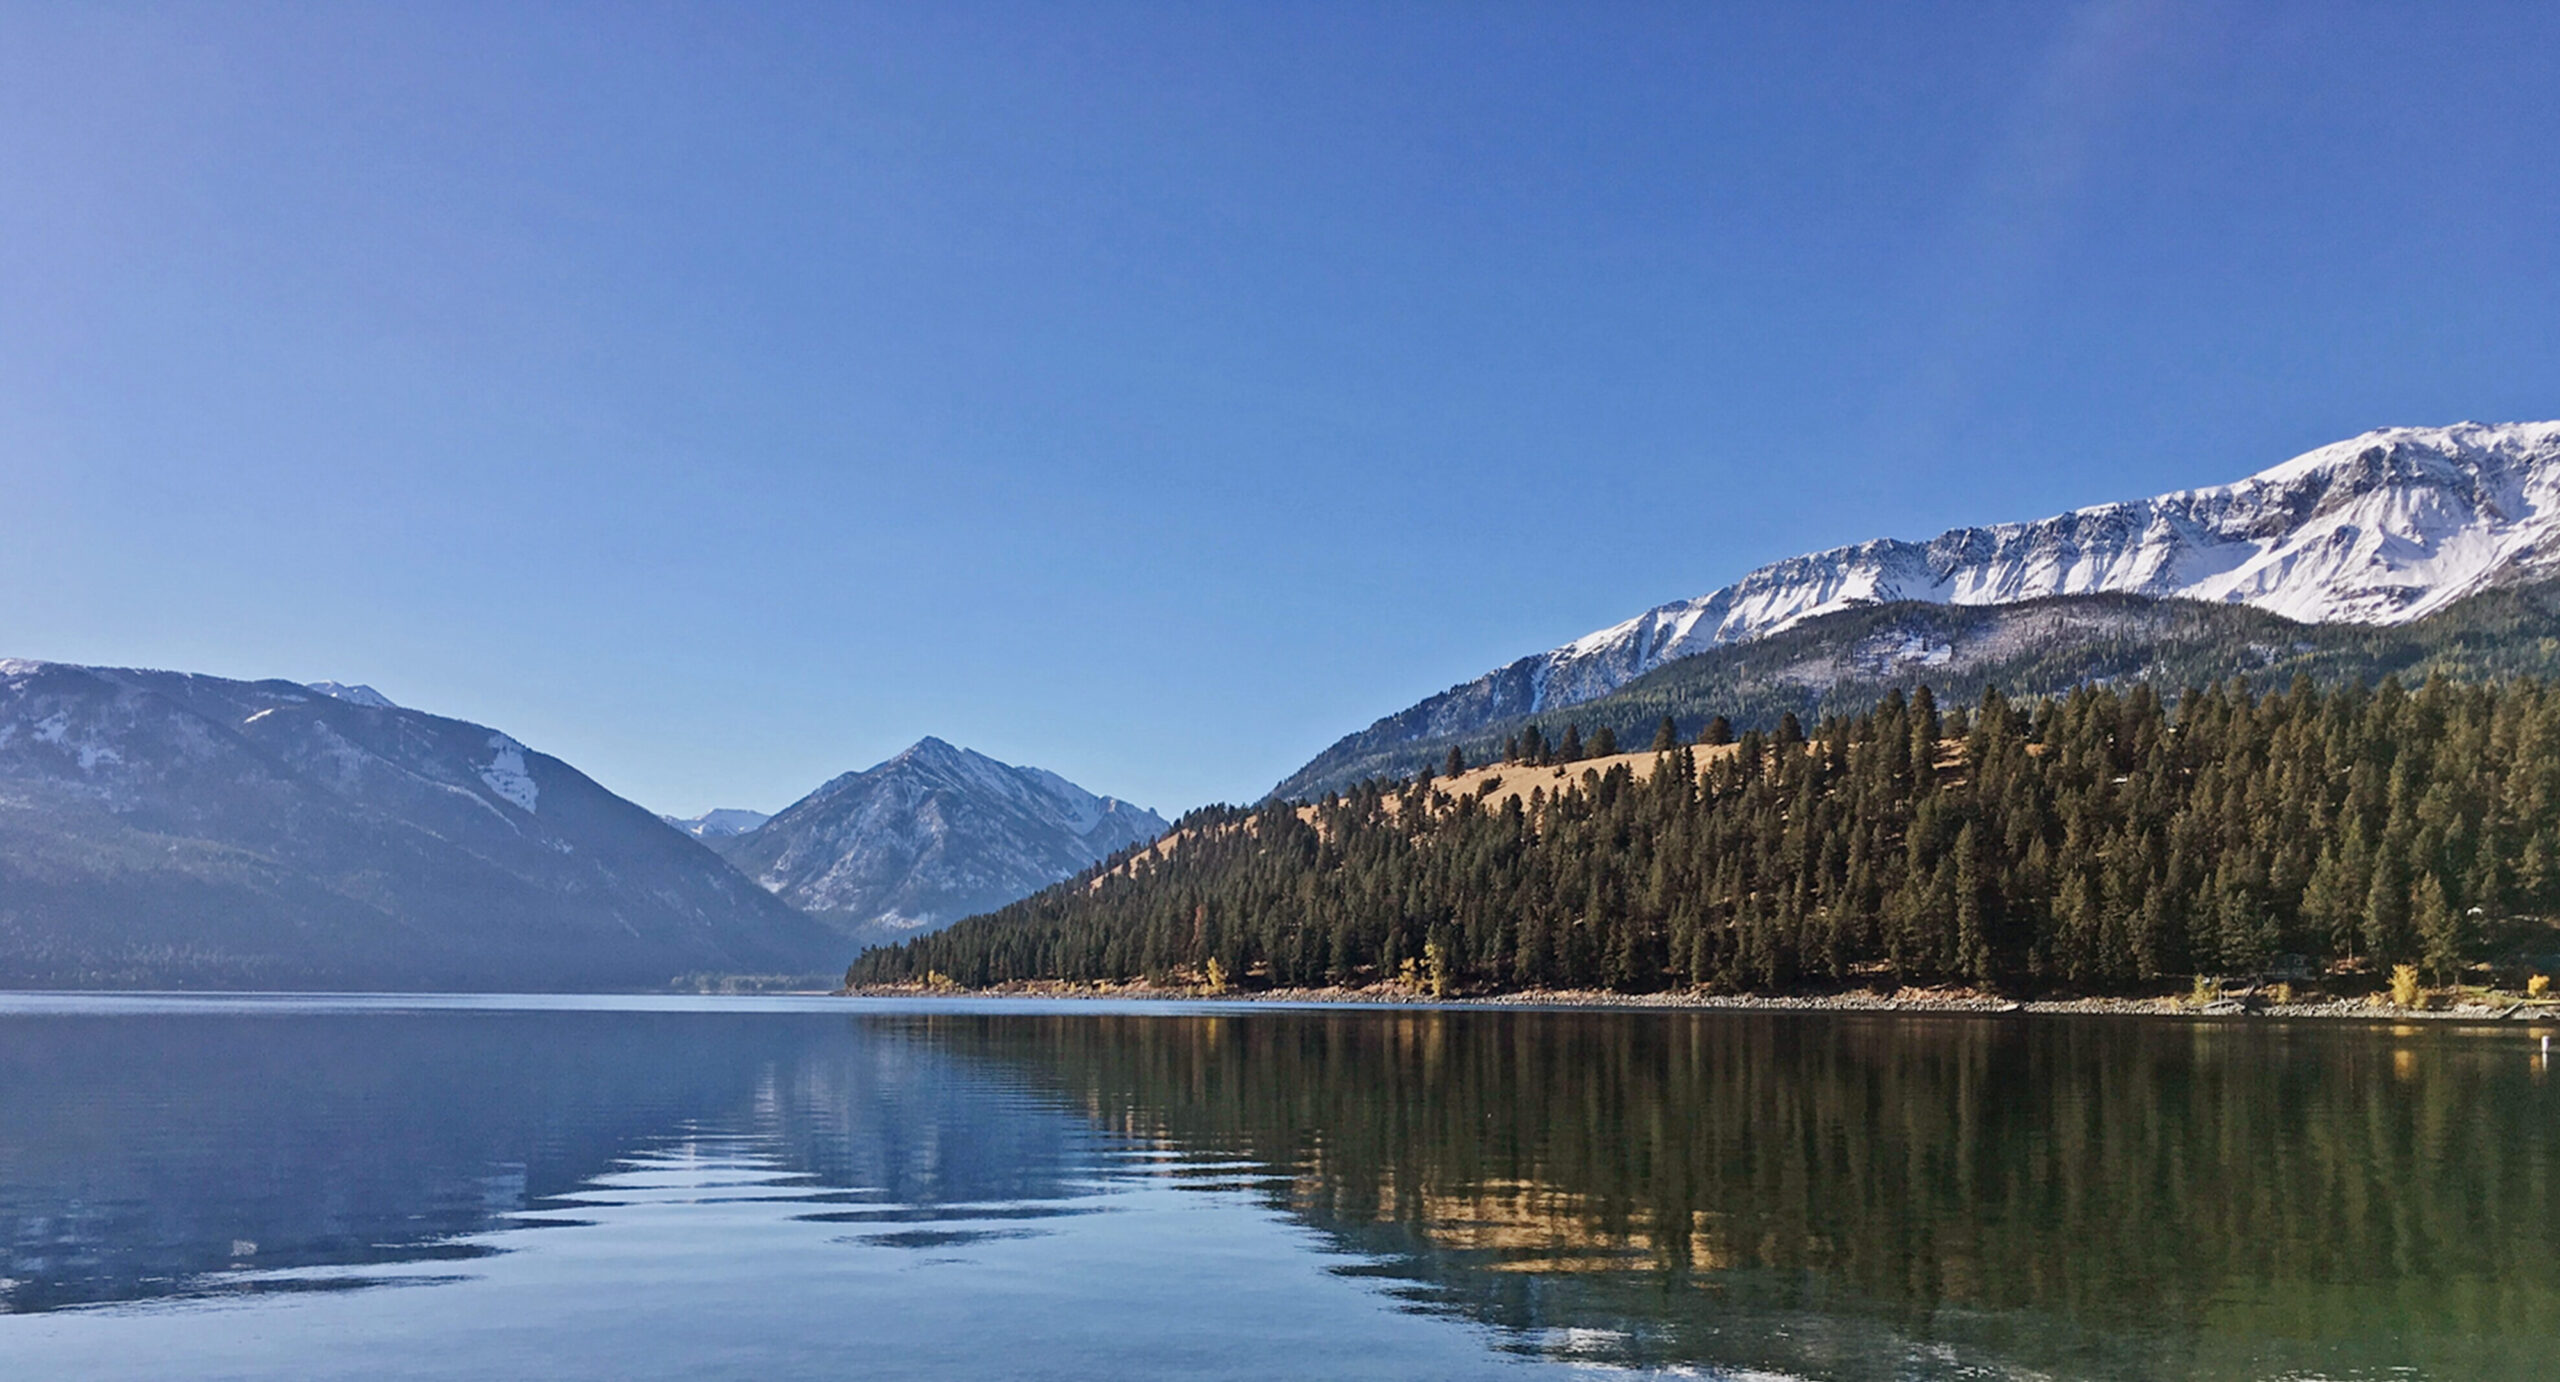 View of Wallowa mountain in Oregon, from across a peaceful lake.